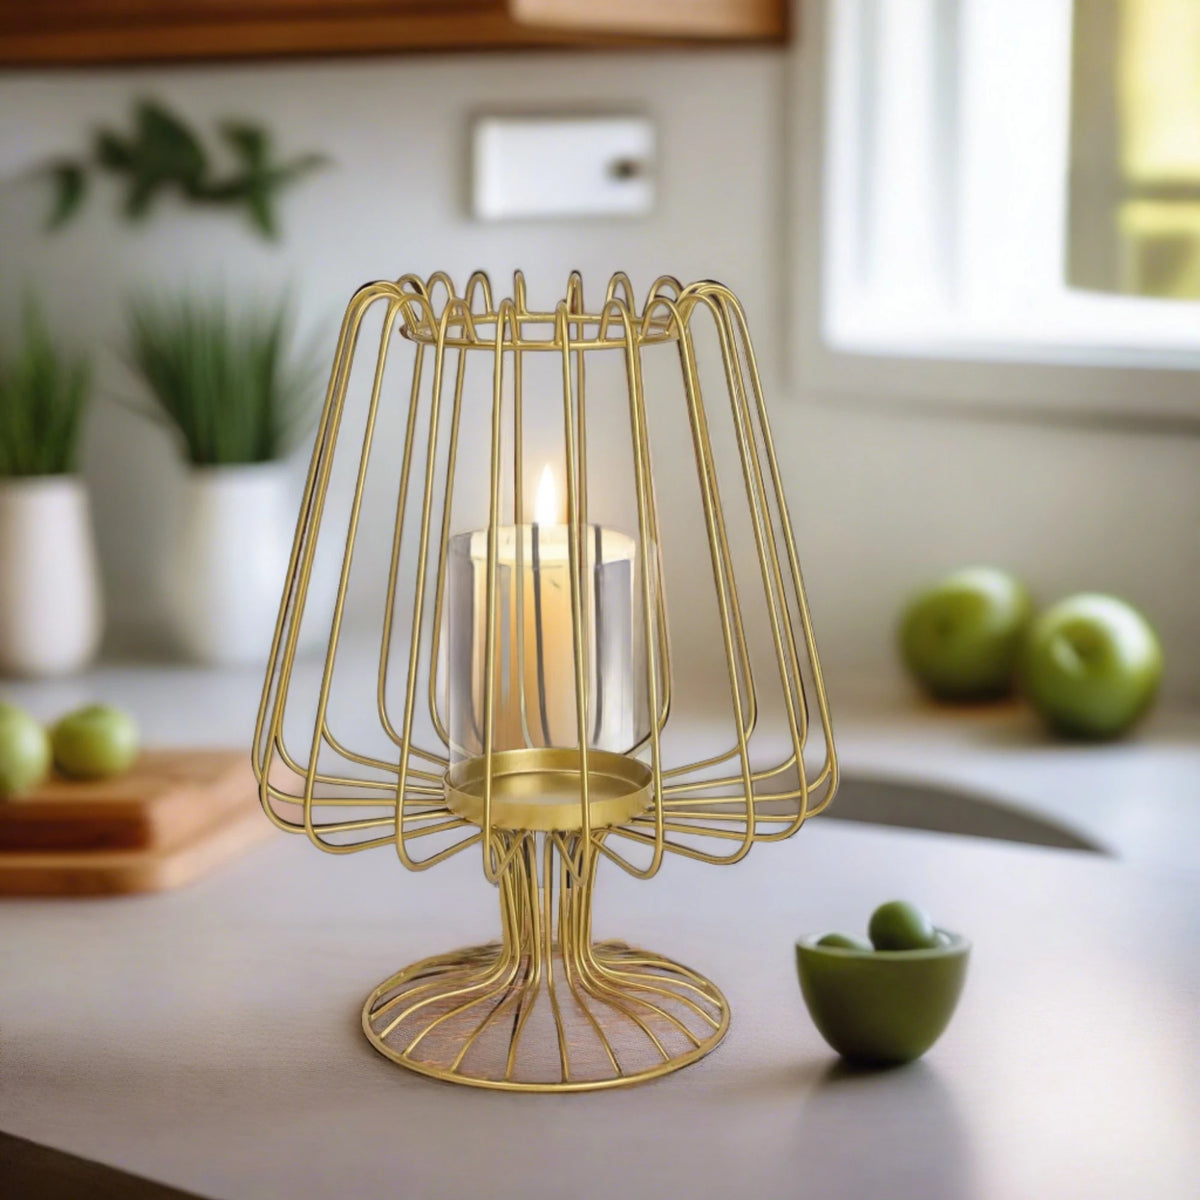 Golden Candle Holder for Home Decor with Glass